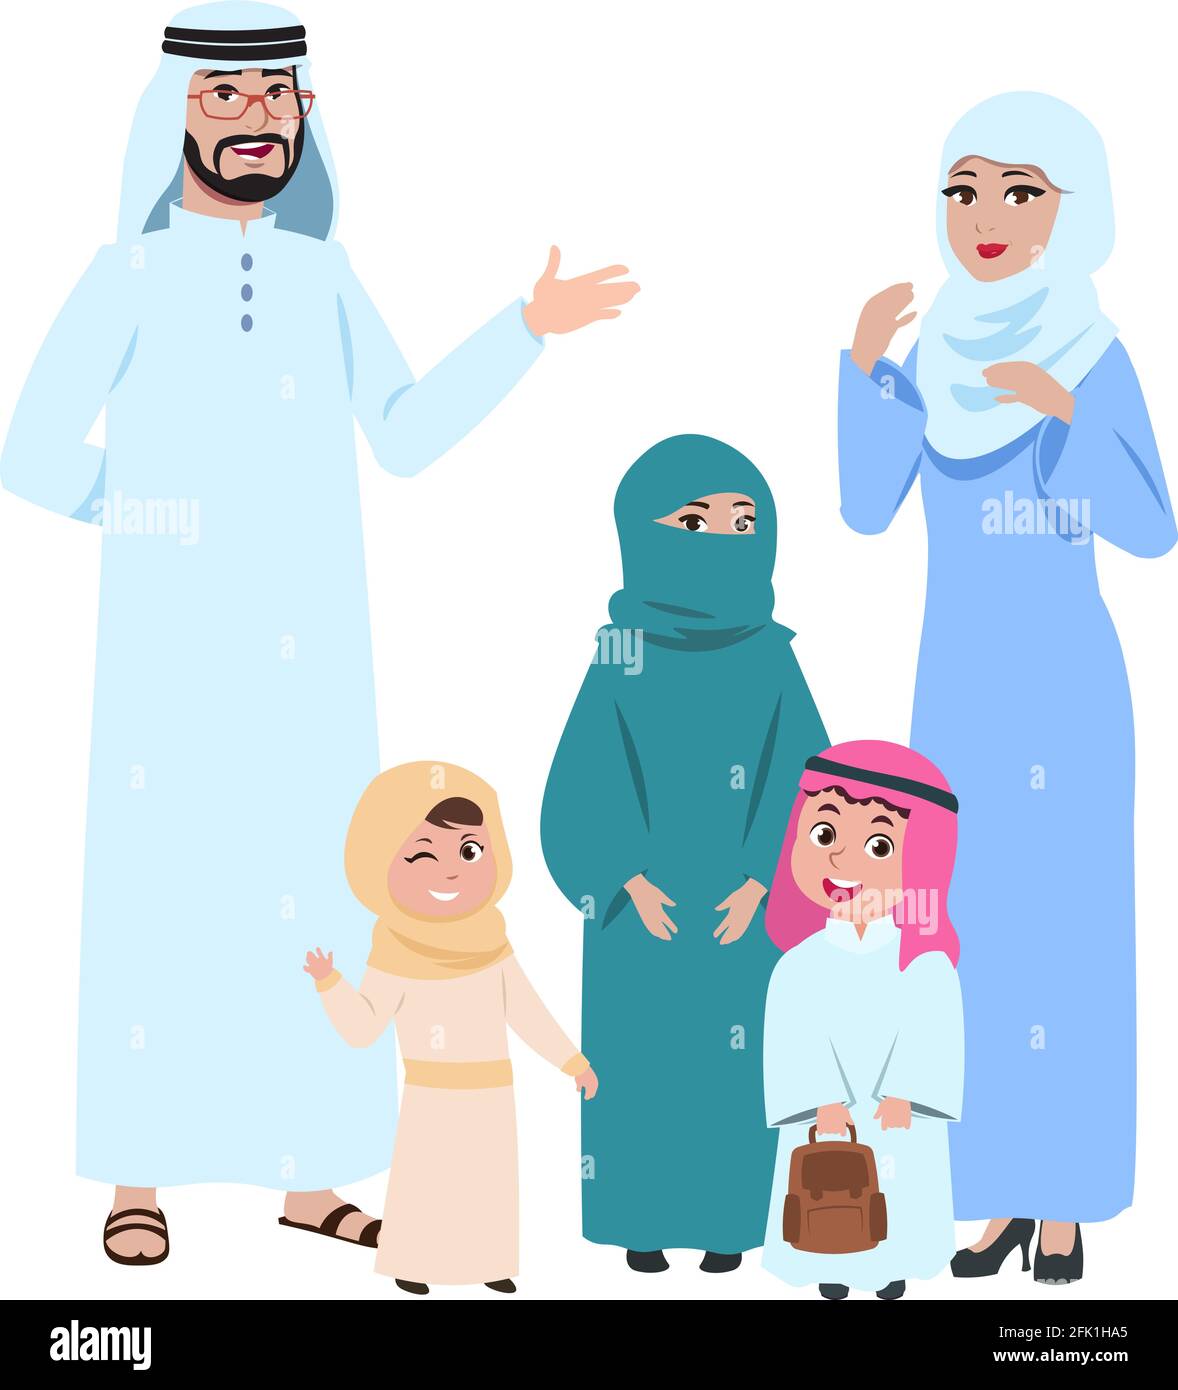 Happy arab family. Muslim young people, islamic man woman and kids. Isolated mother in hijab girl boy and father cartoon characters. Smiley parents Stock Vector